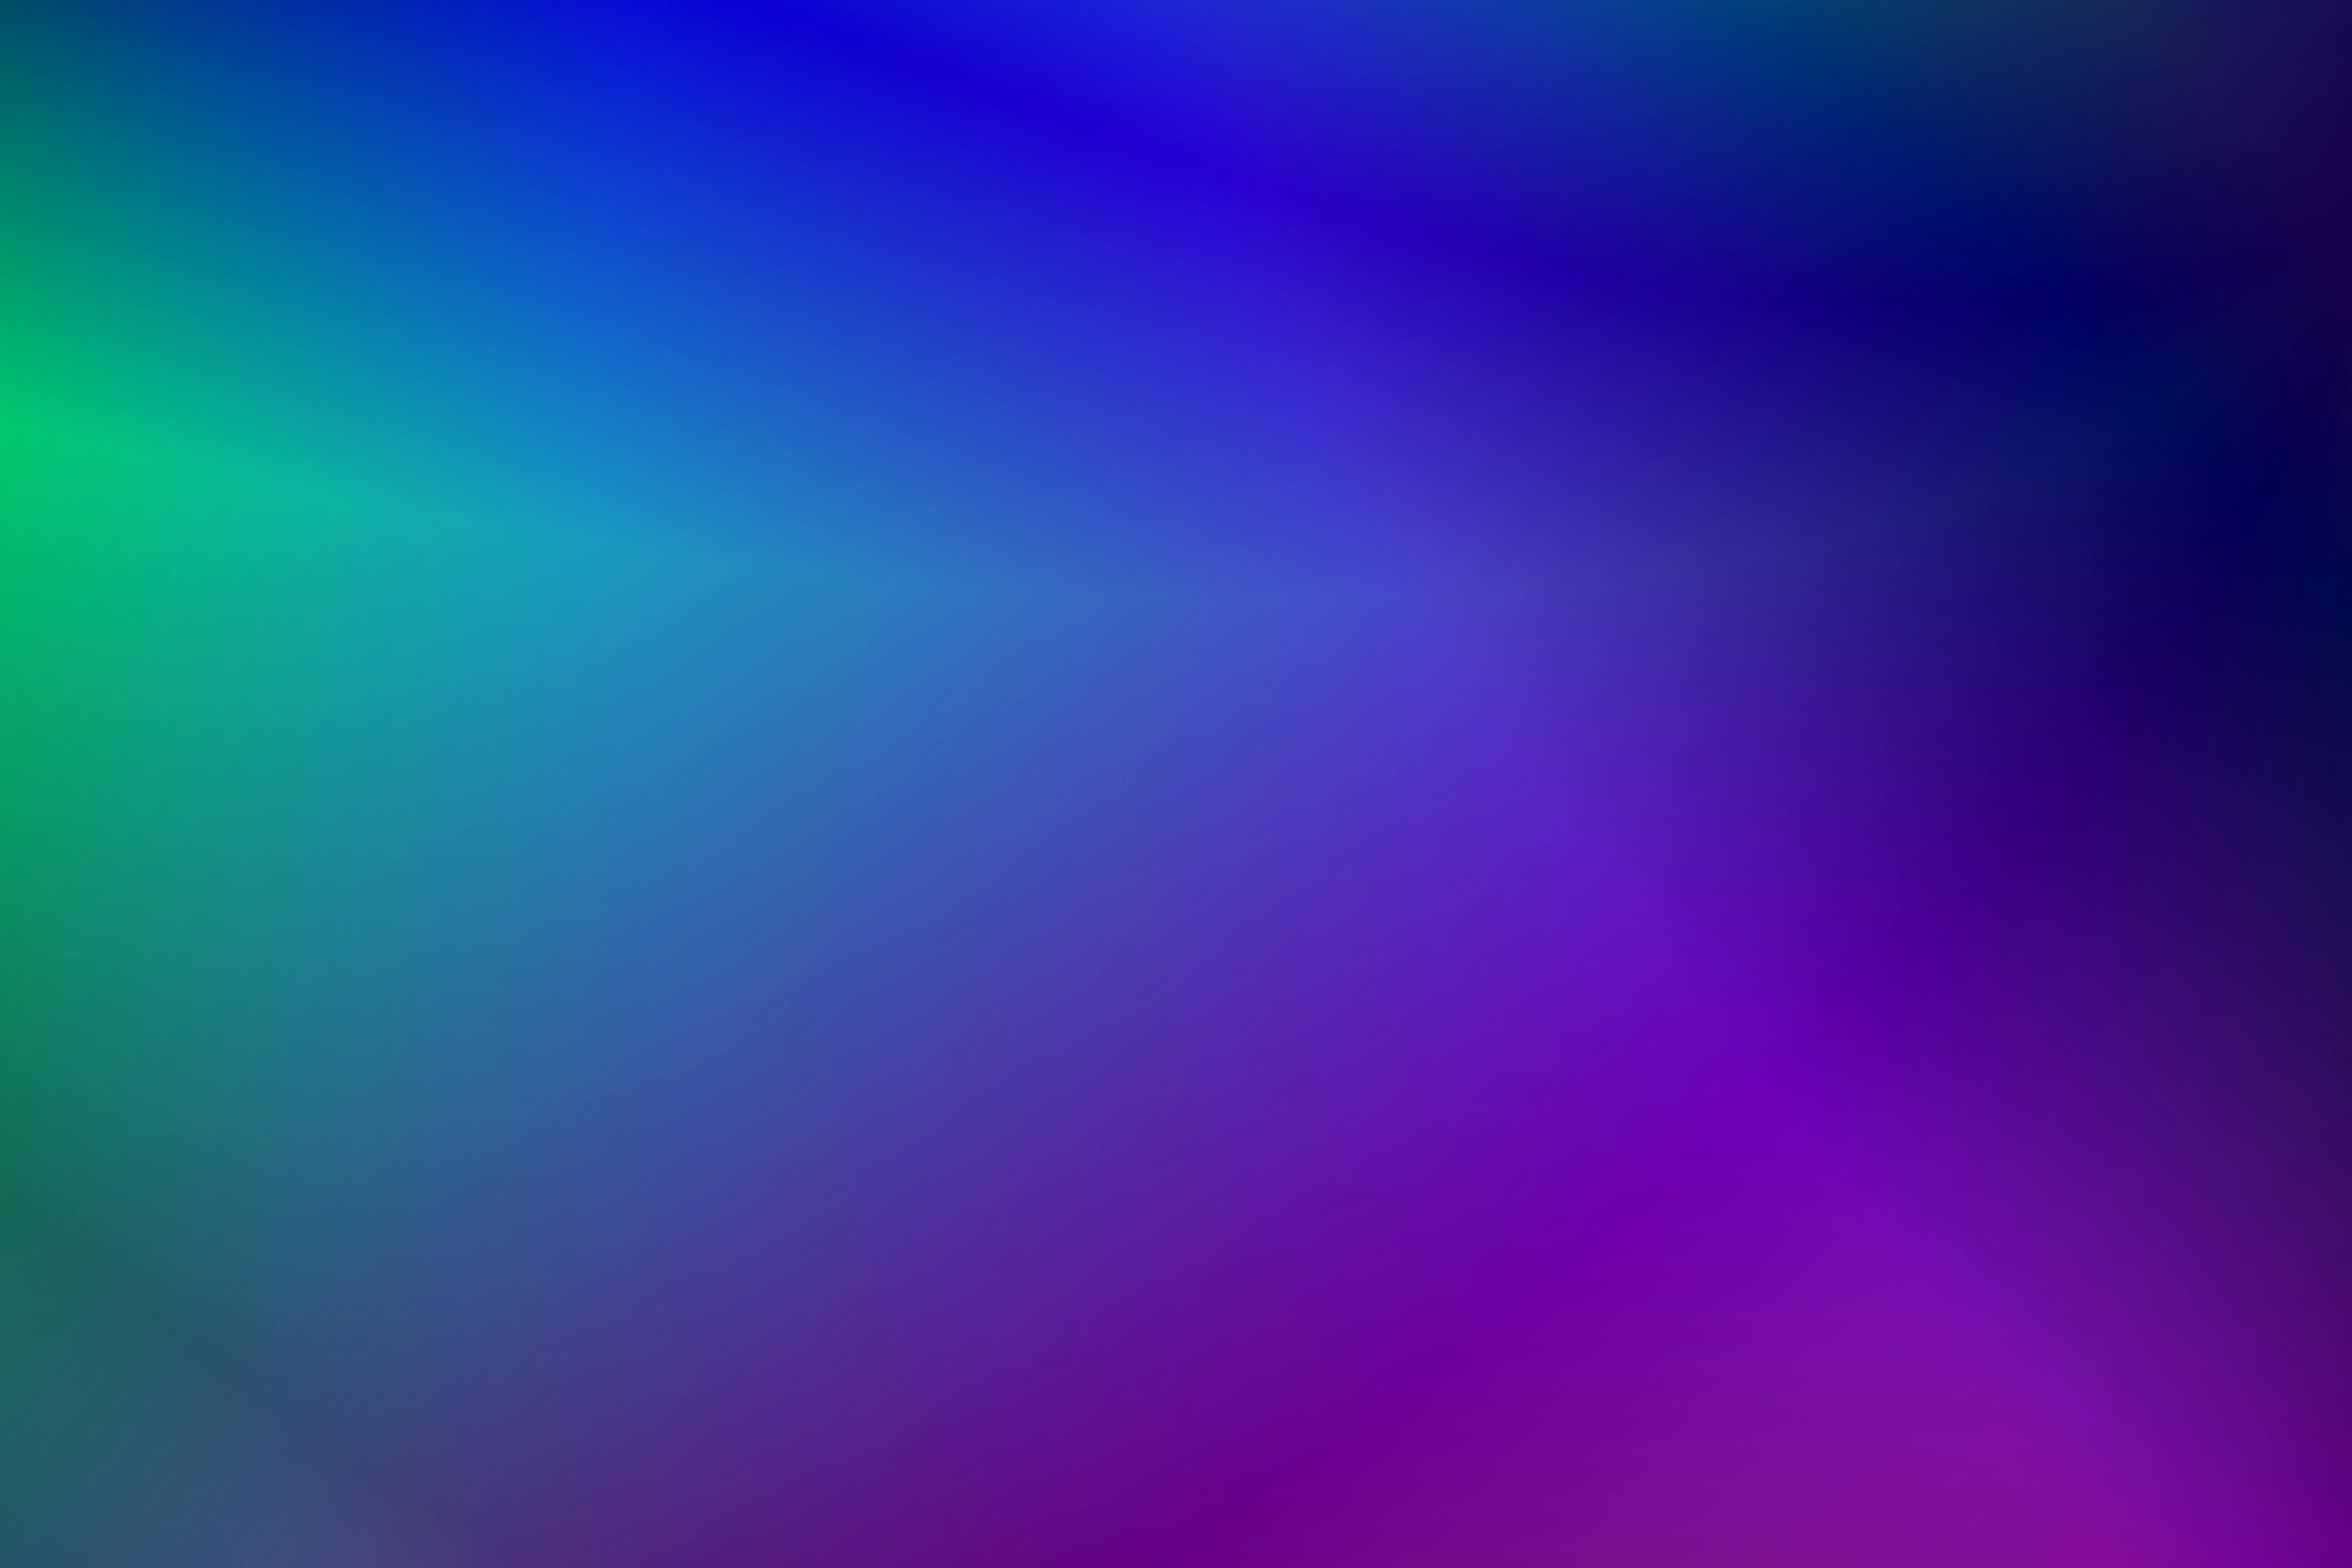 Purple and Blue Gradient · Free Stock Photo